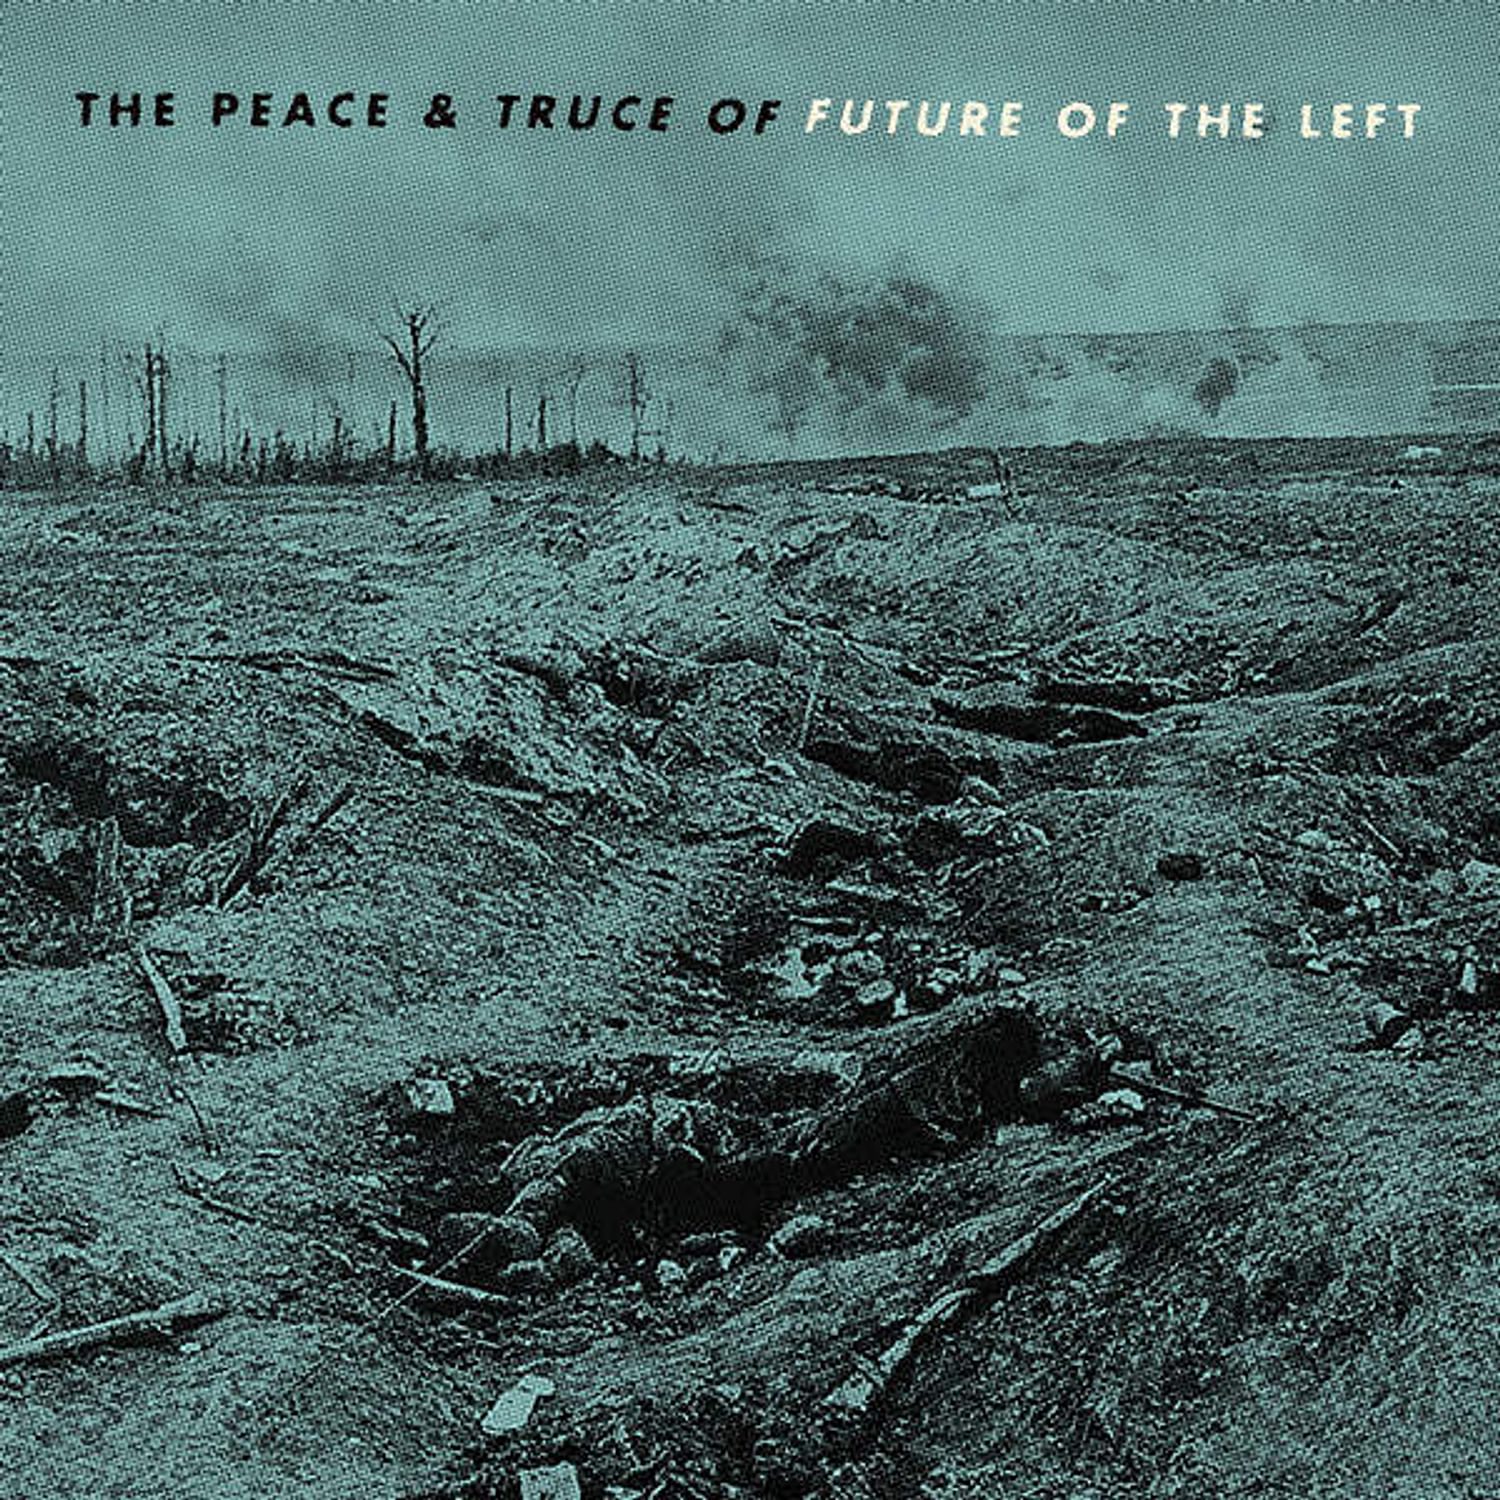 Future of the Left - the peace & truce of future of the left